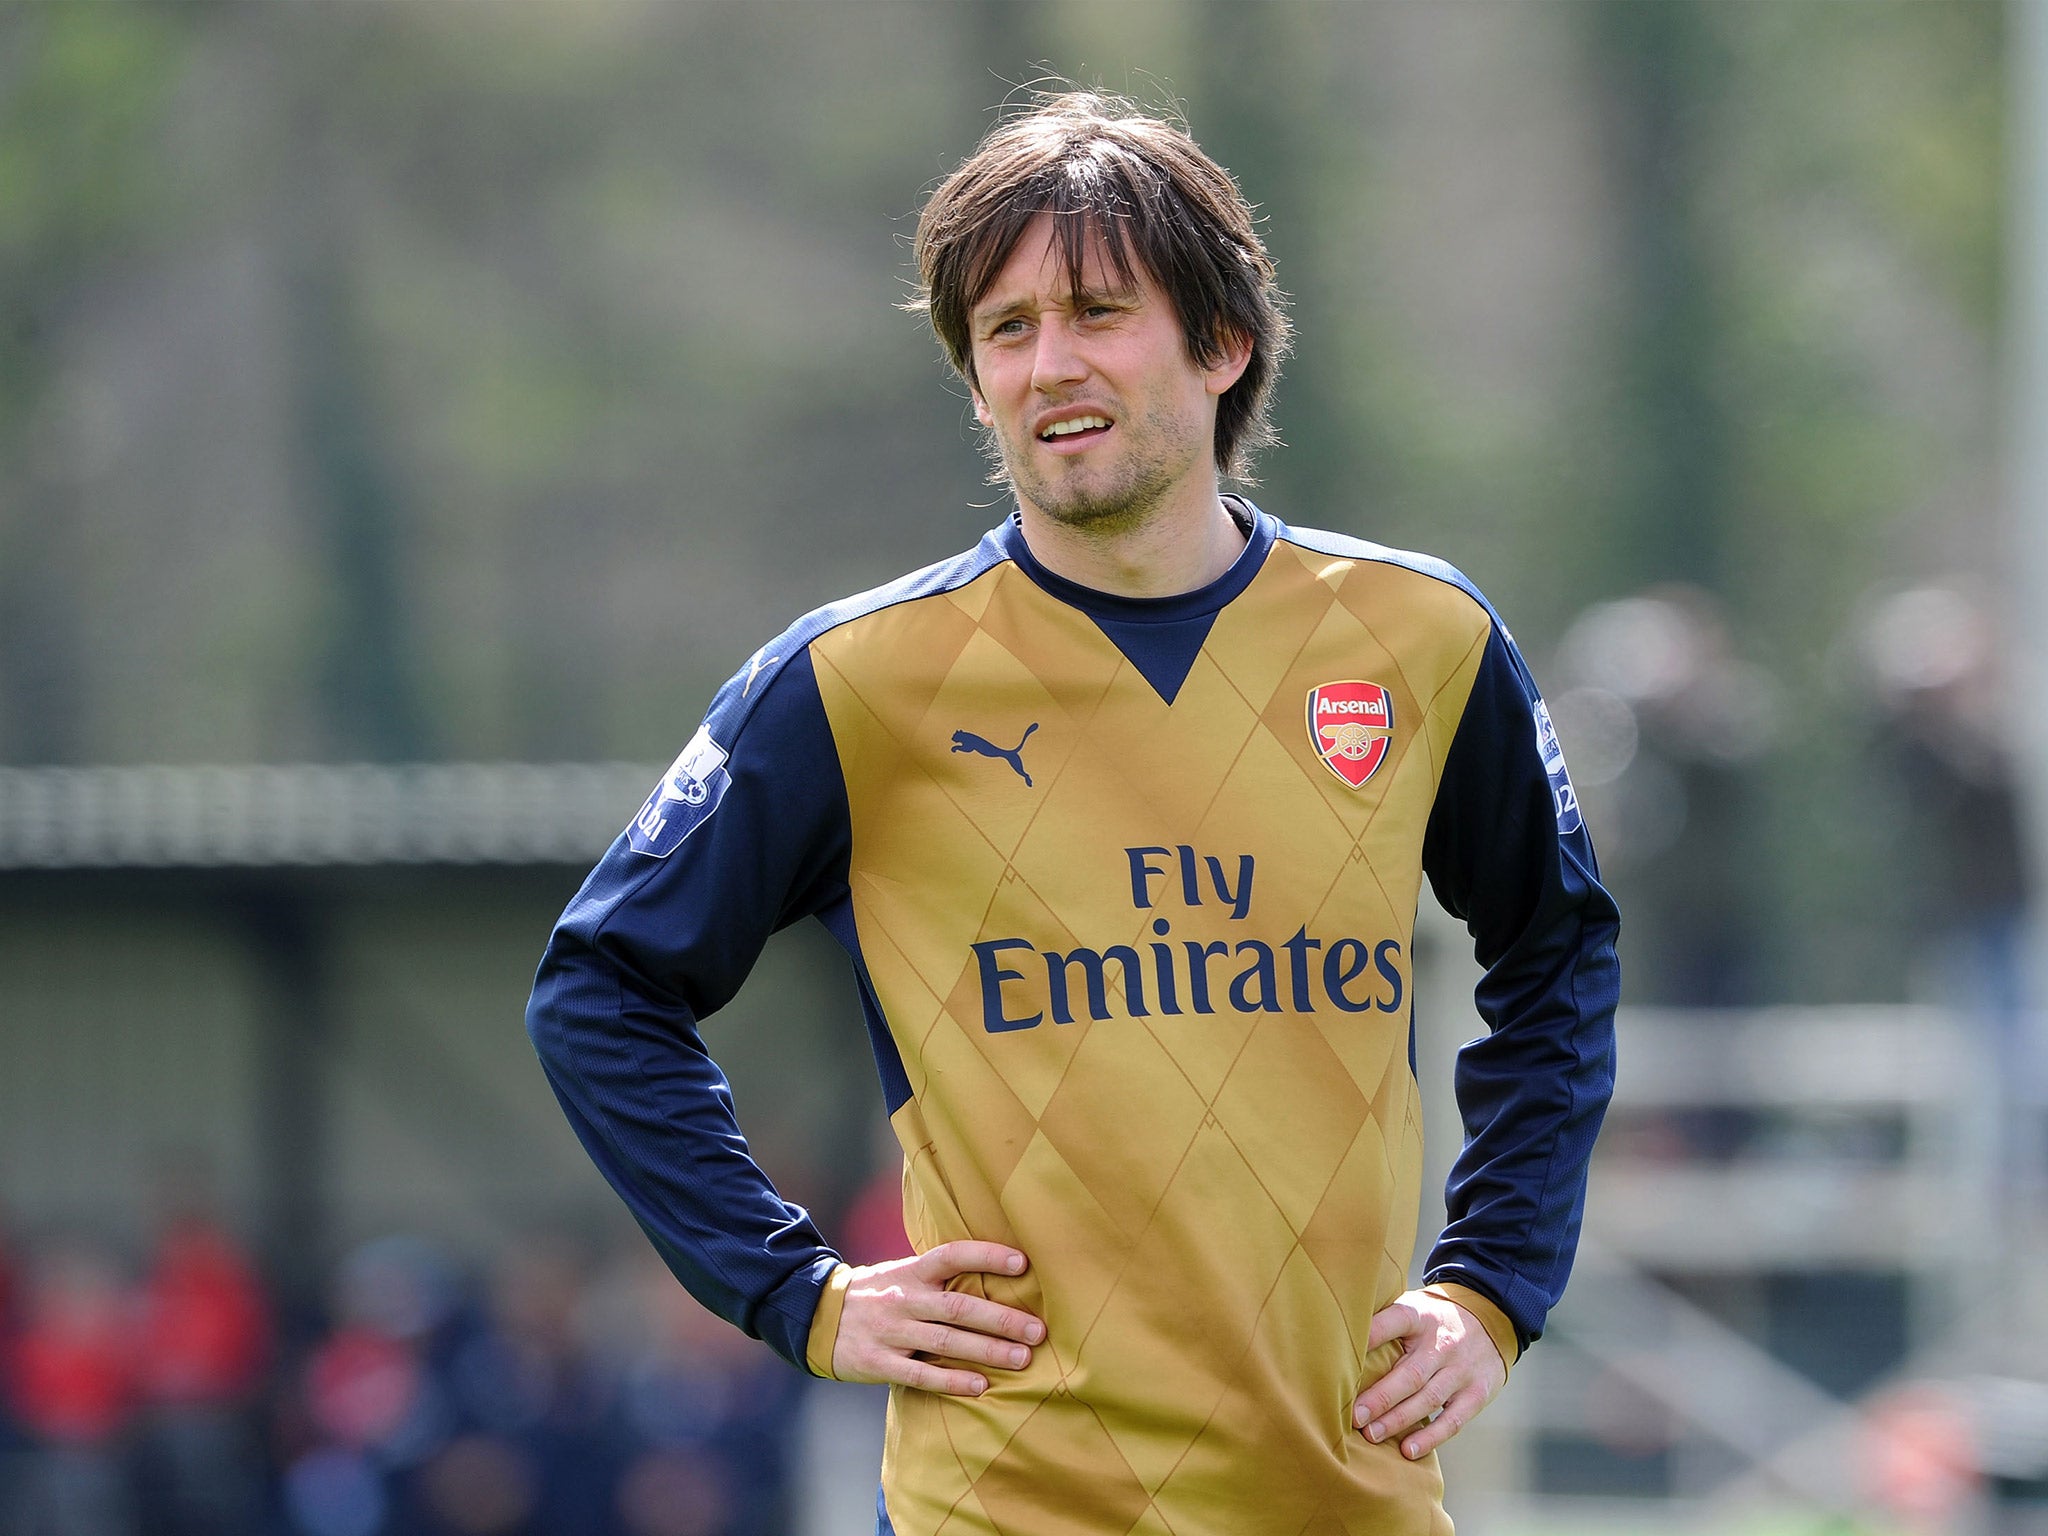 &#13;
Rosicky?spent 10 years at Arsenal &#13;